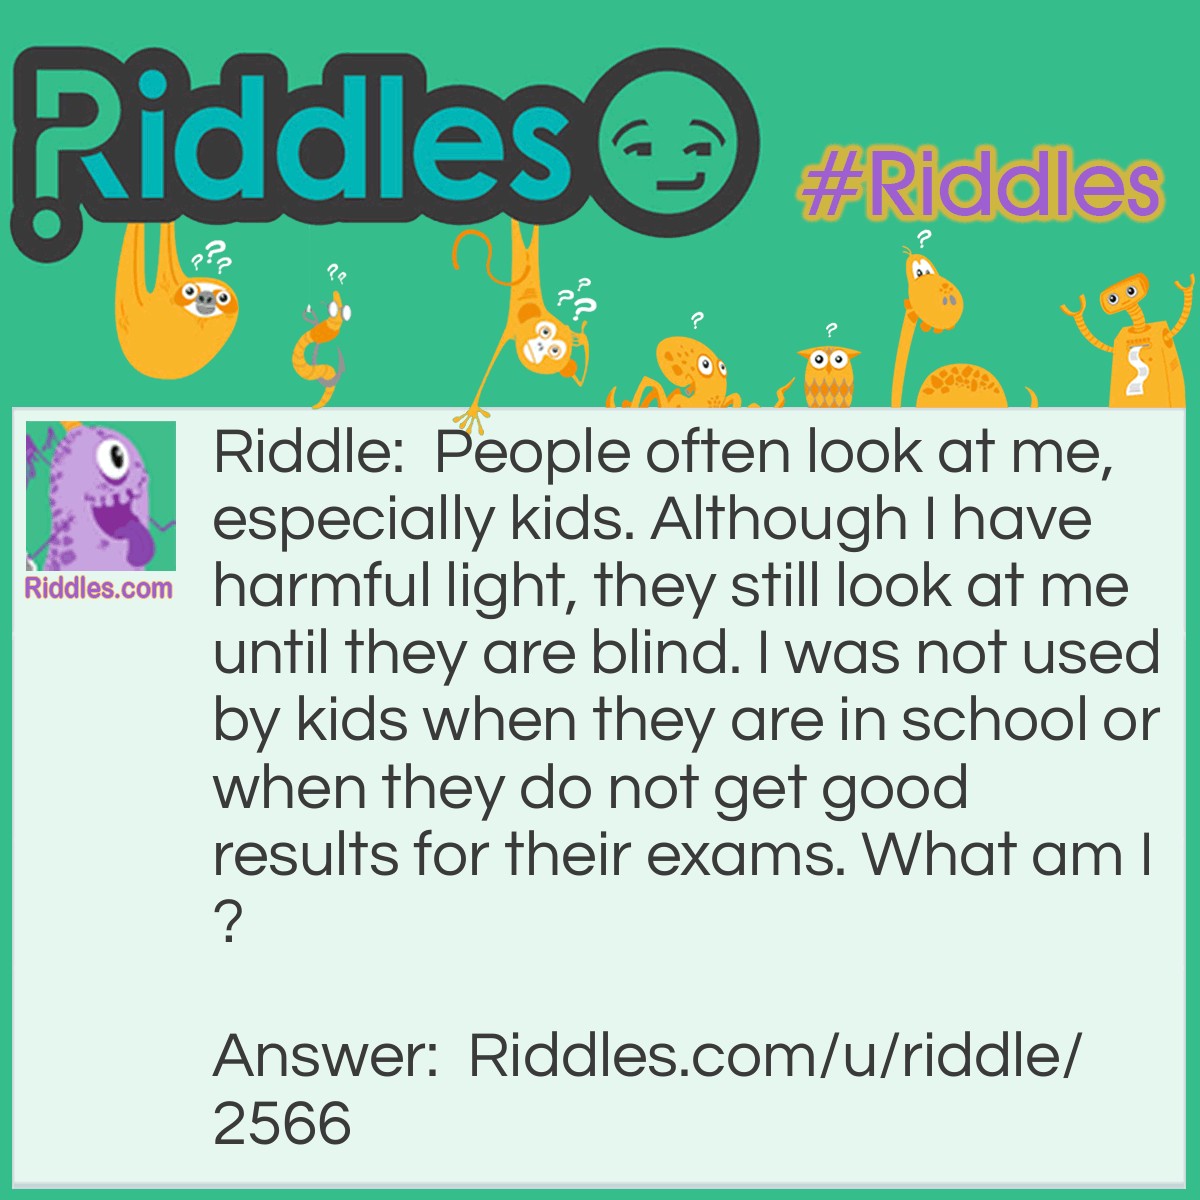 Riddle: People often look at me, especially kids. Although I have harmful light, they still look at me until they are blind. I was not used by kids when they are in school or when they do not get good results for their exams. What am I? Answer: A tablet.